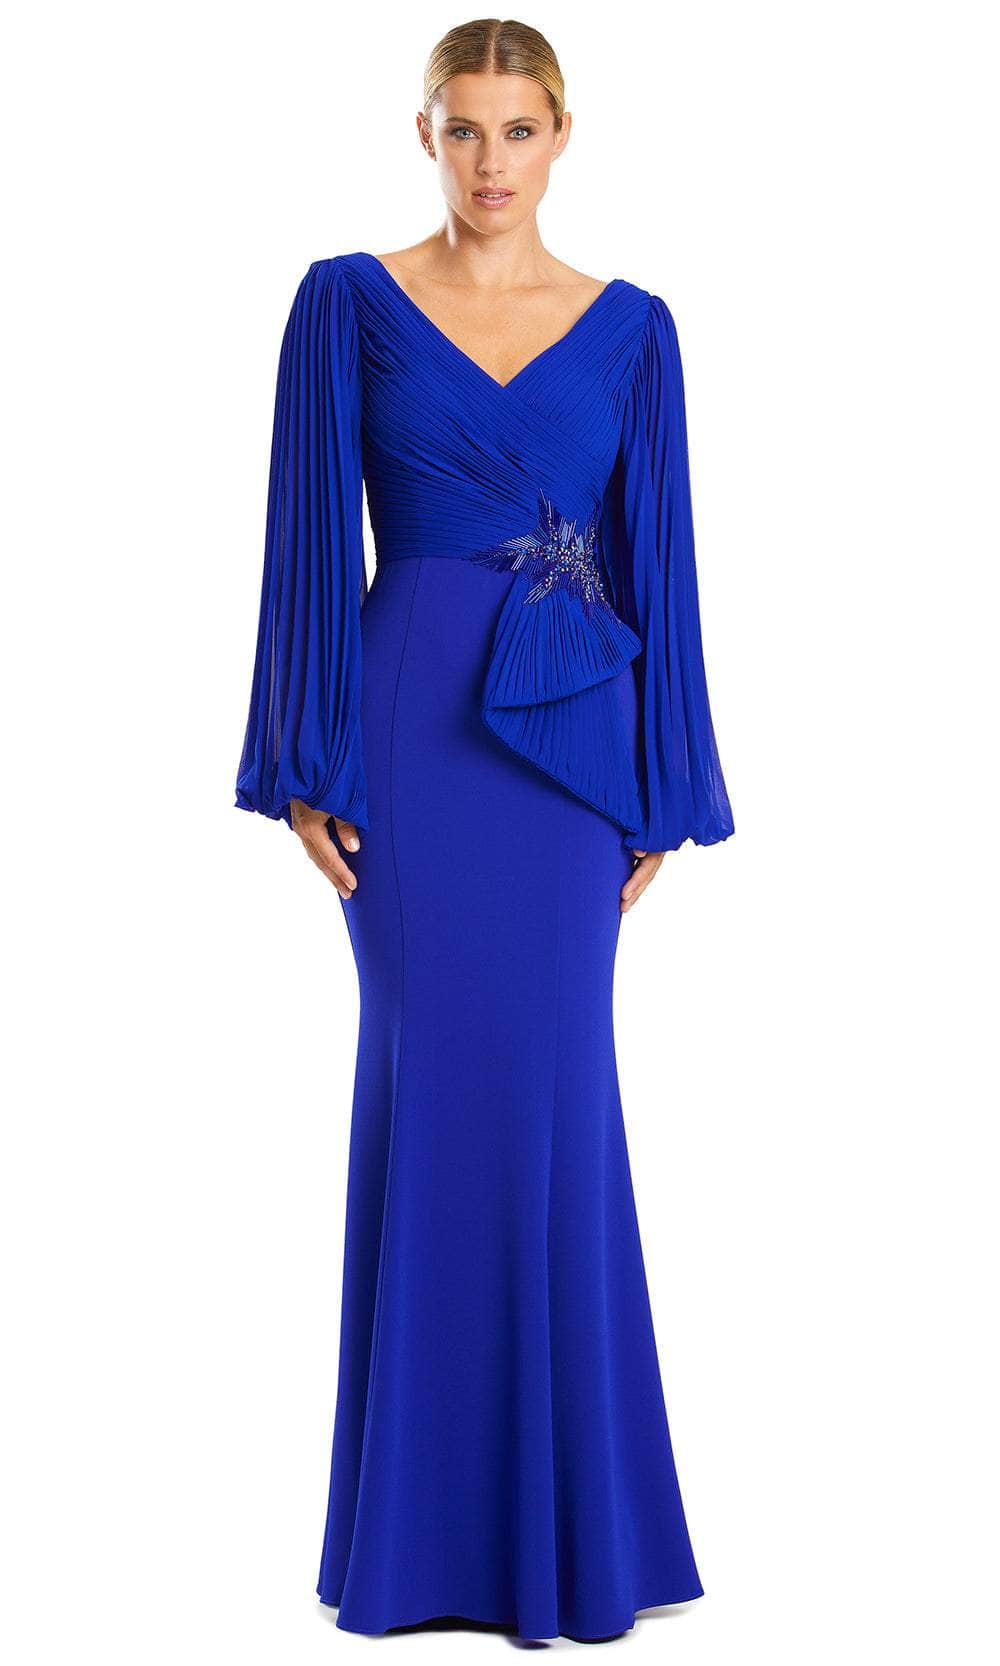 Alexander by Daymor 1886F23 - Pleated V-Neck Evening Gown 00 / Sapphire